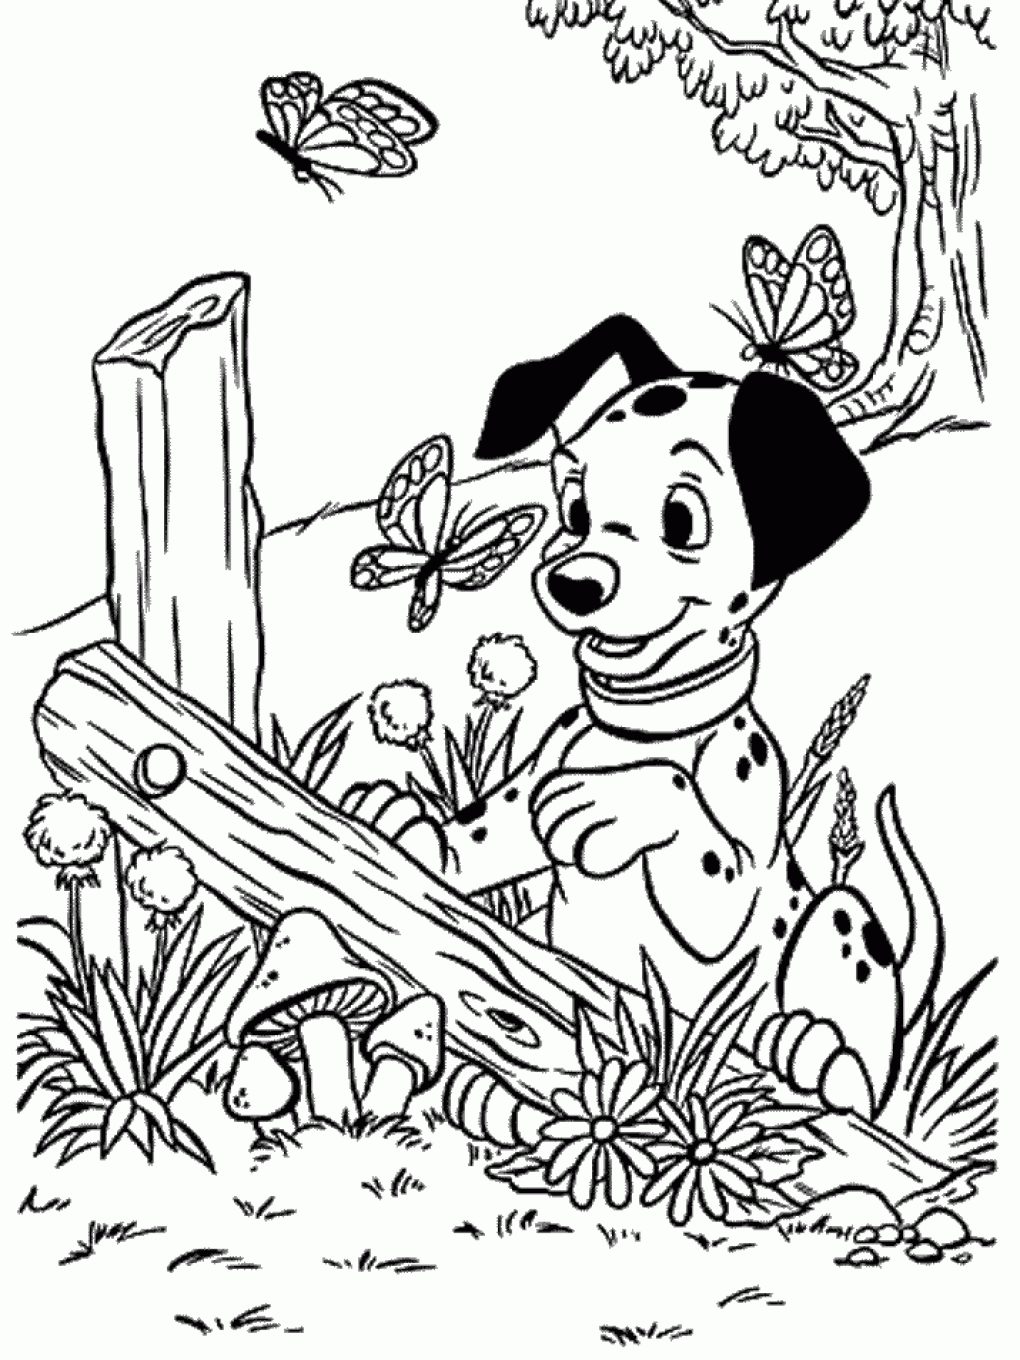 101 Dalmatians To Print For Free 101 Dalmatians Kids Coloring Pages